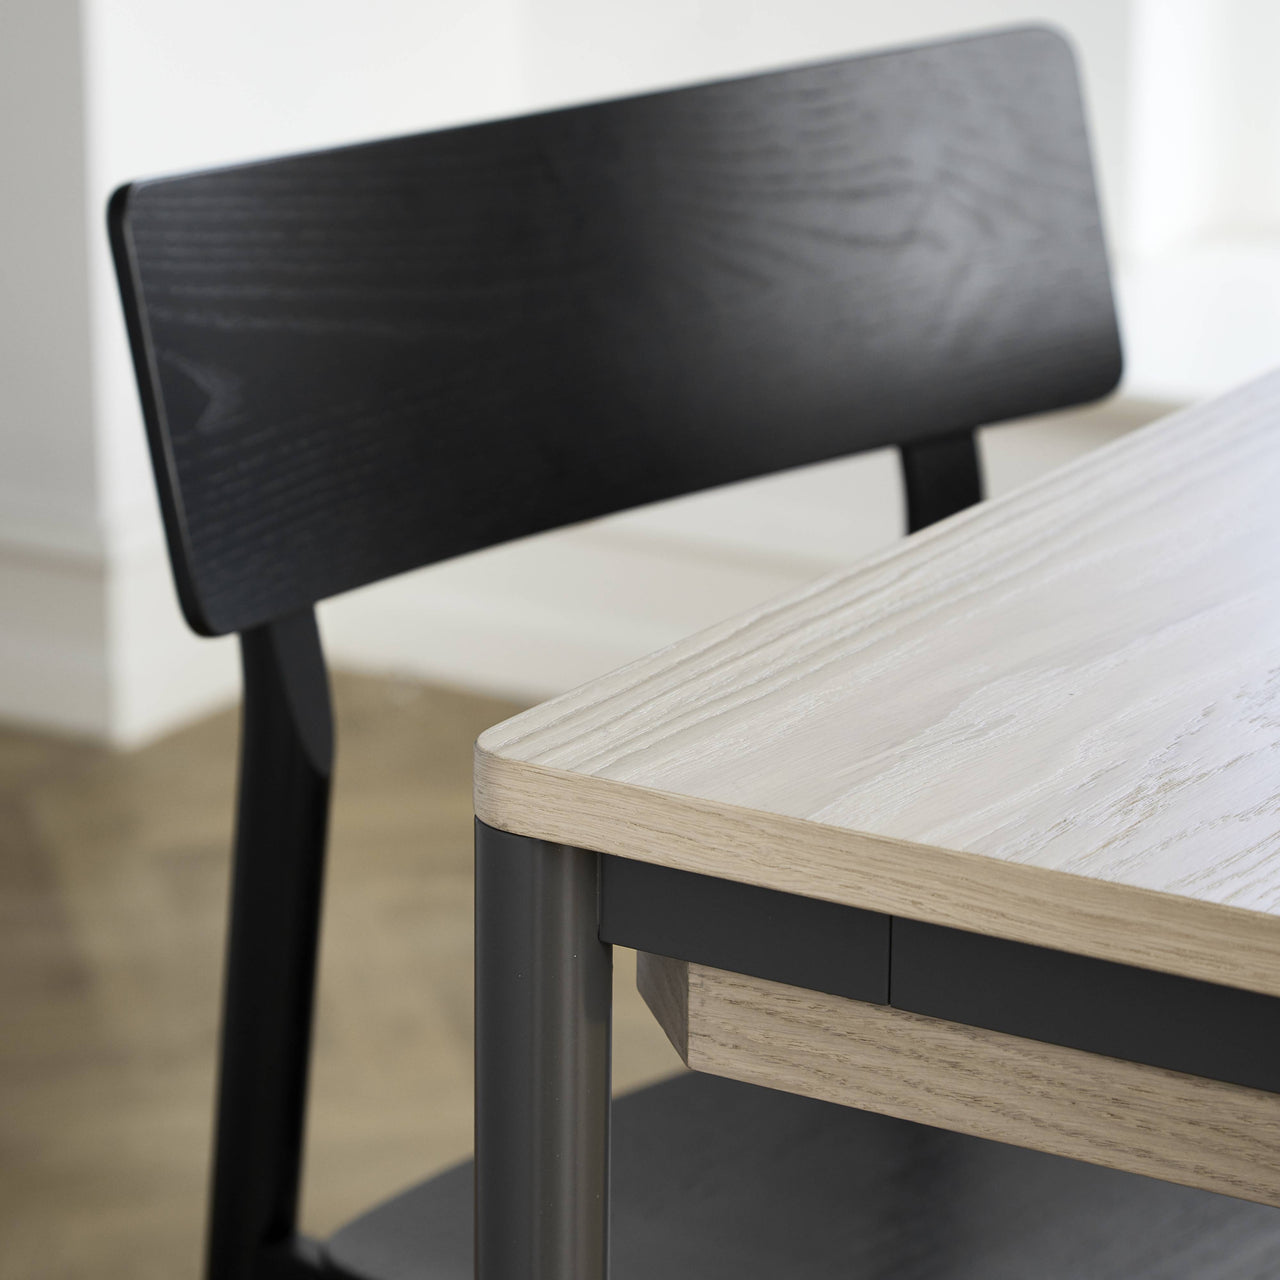 Pause Dining Chair 2.0